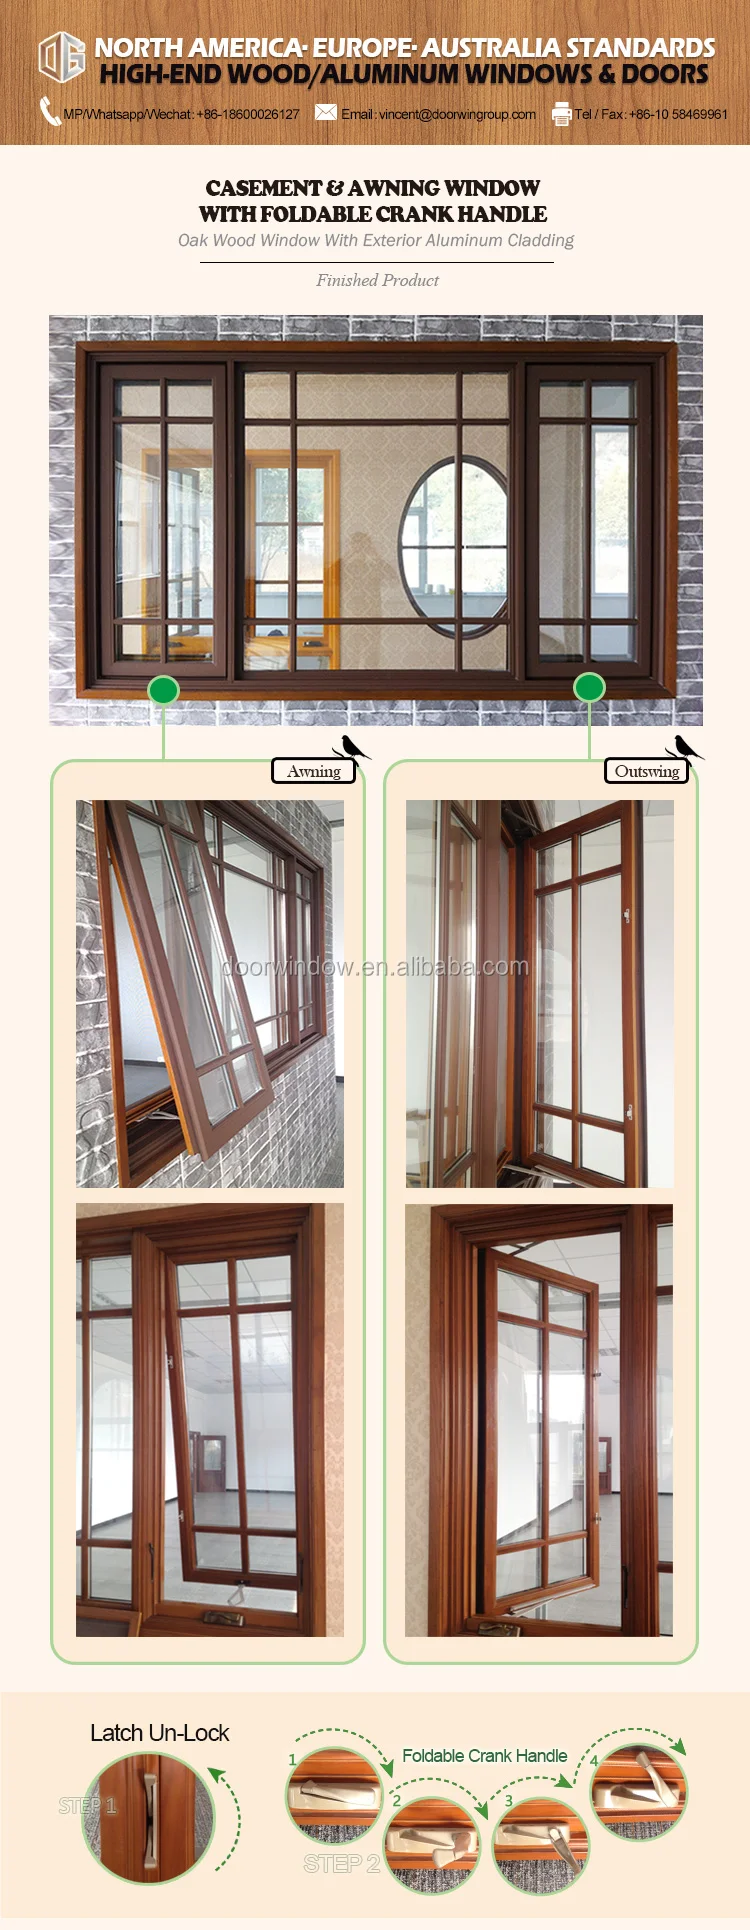 American Certified Crank Awning Window Solid Oak Wood with Exterior Aluminum Cladding with Grille Design crank open window